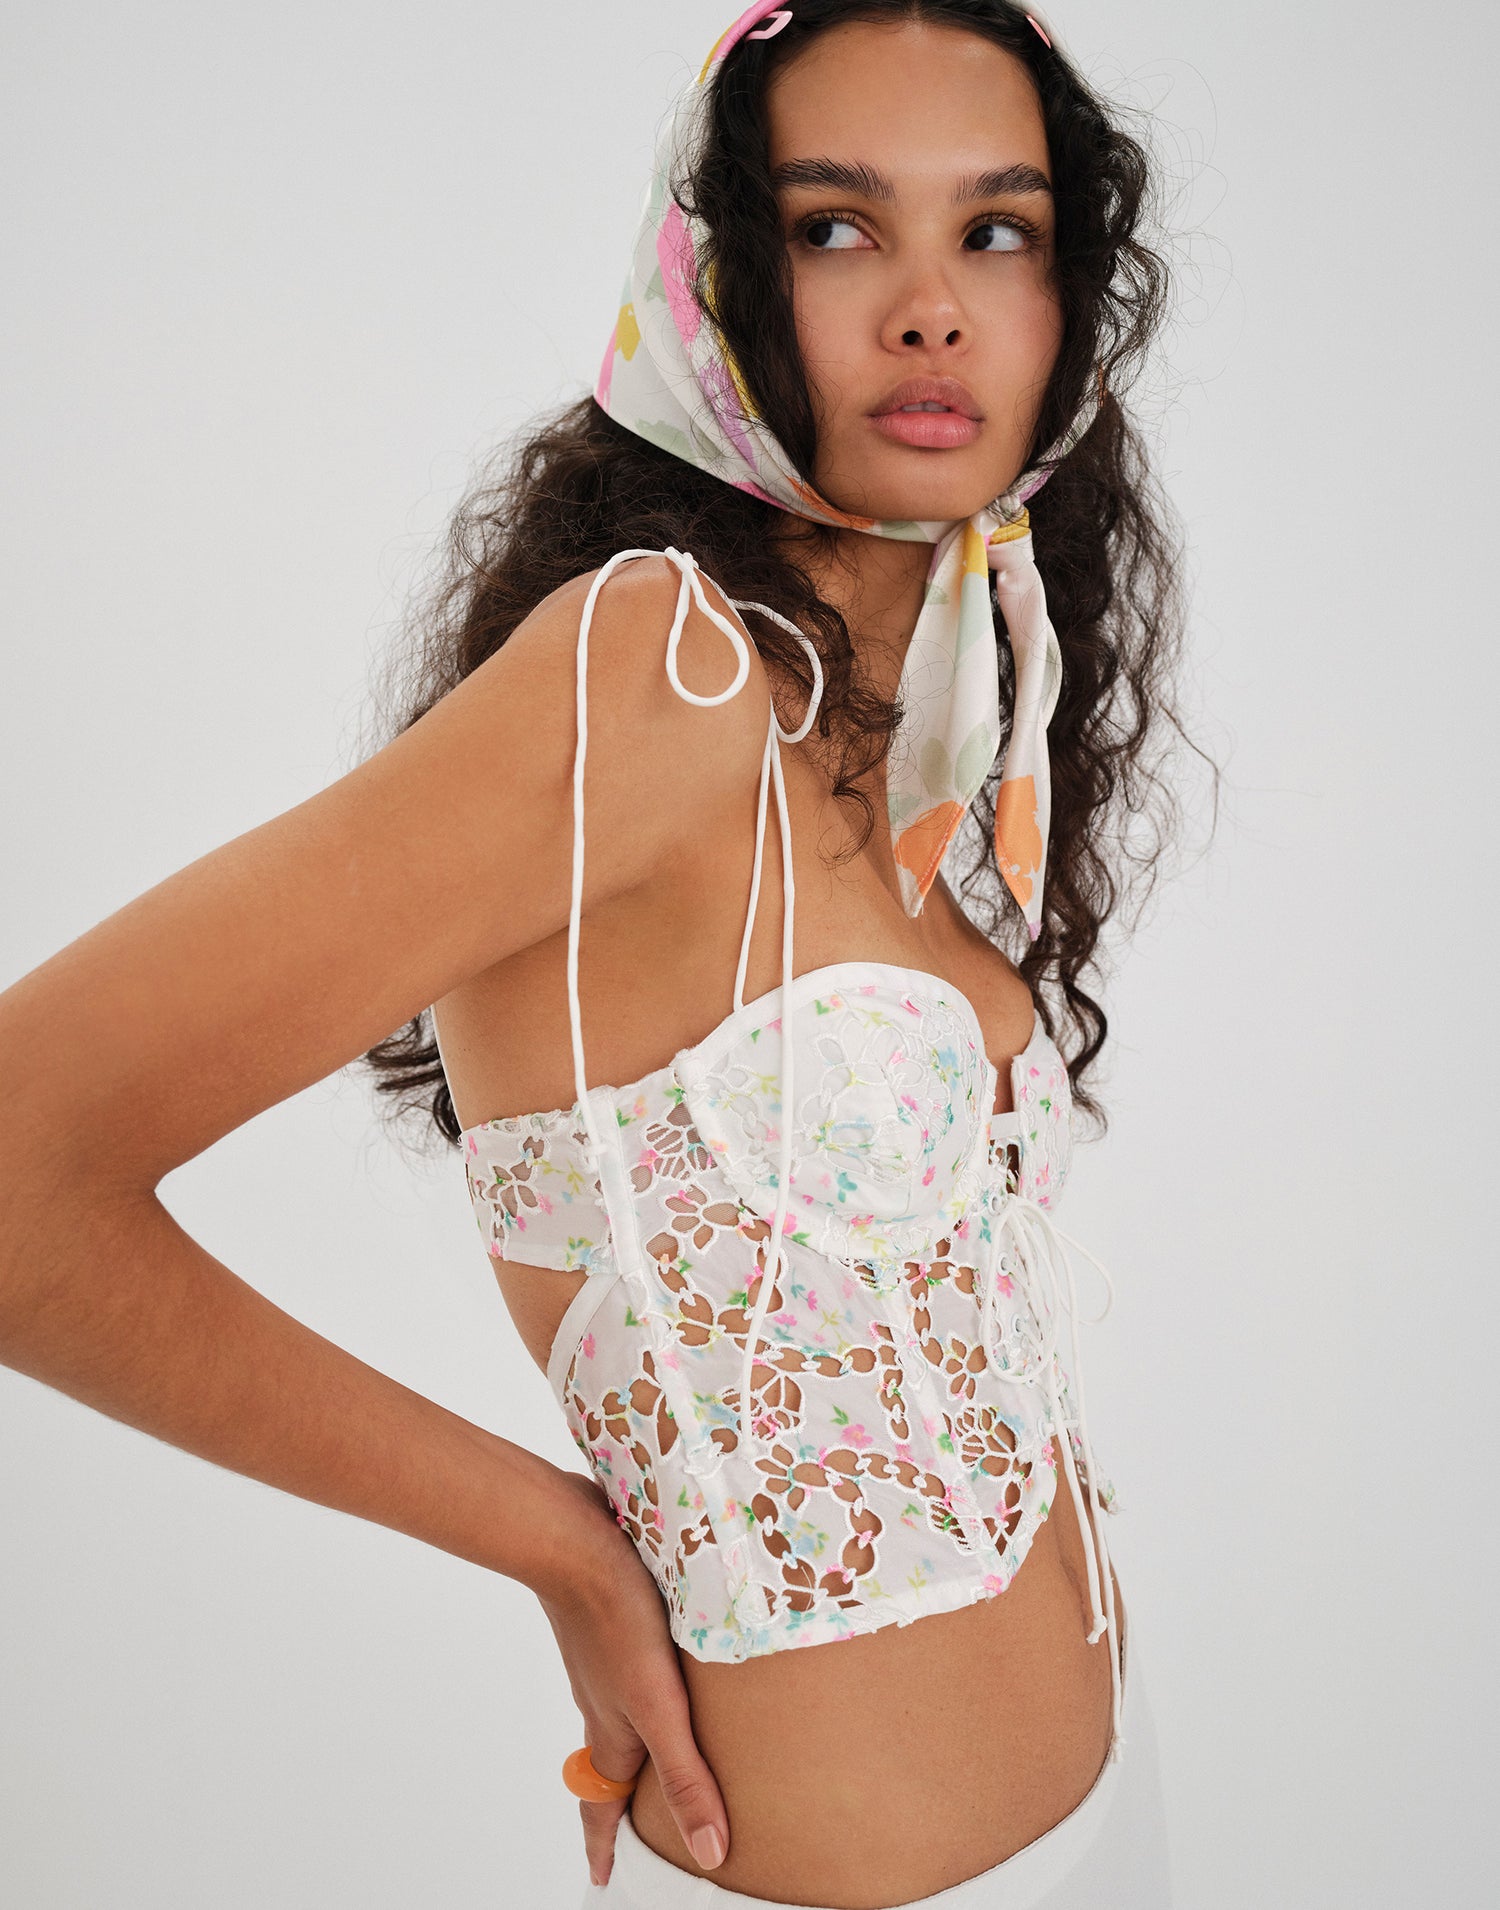 Kyra ﻿Laser-Cut Printed Taffeta Corset Crop Top by For Love & Lemons in White - Angled View